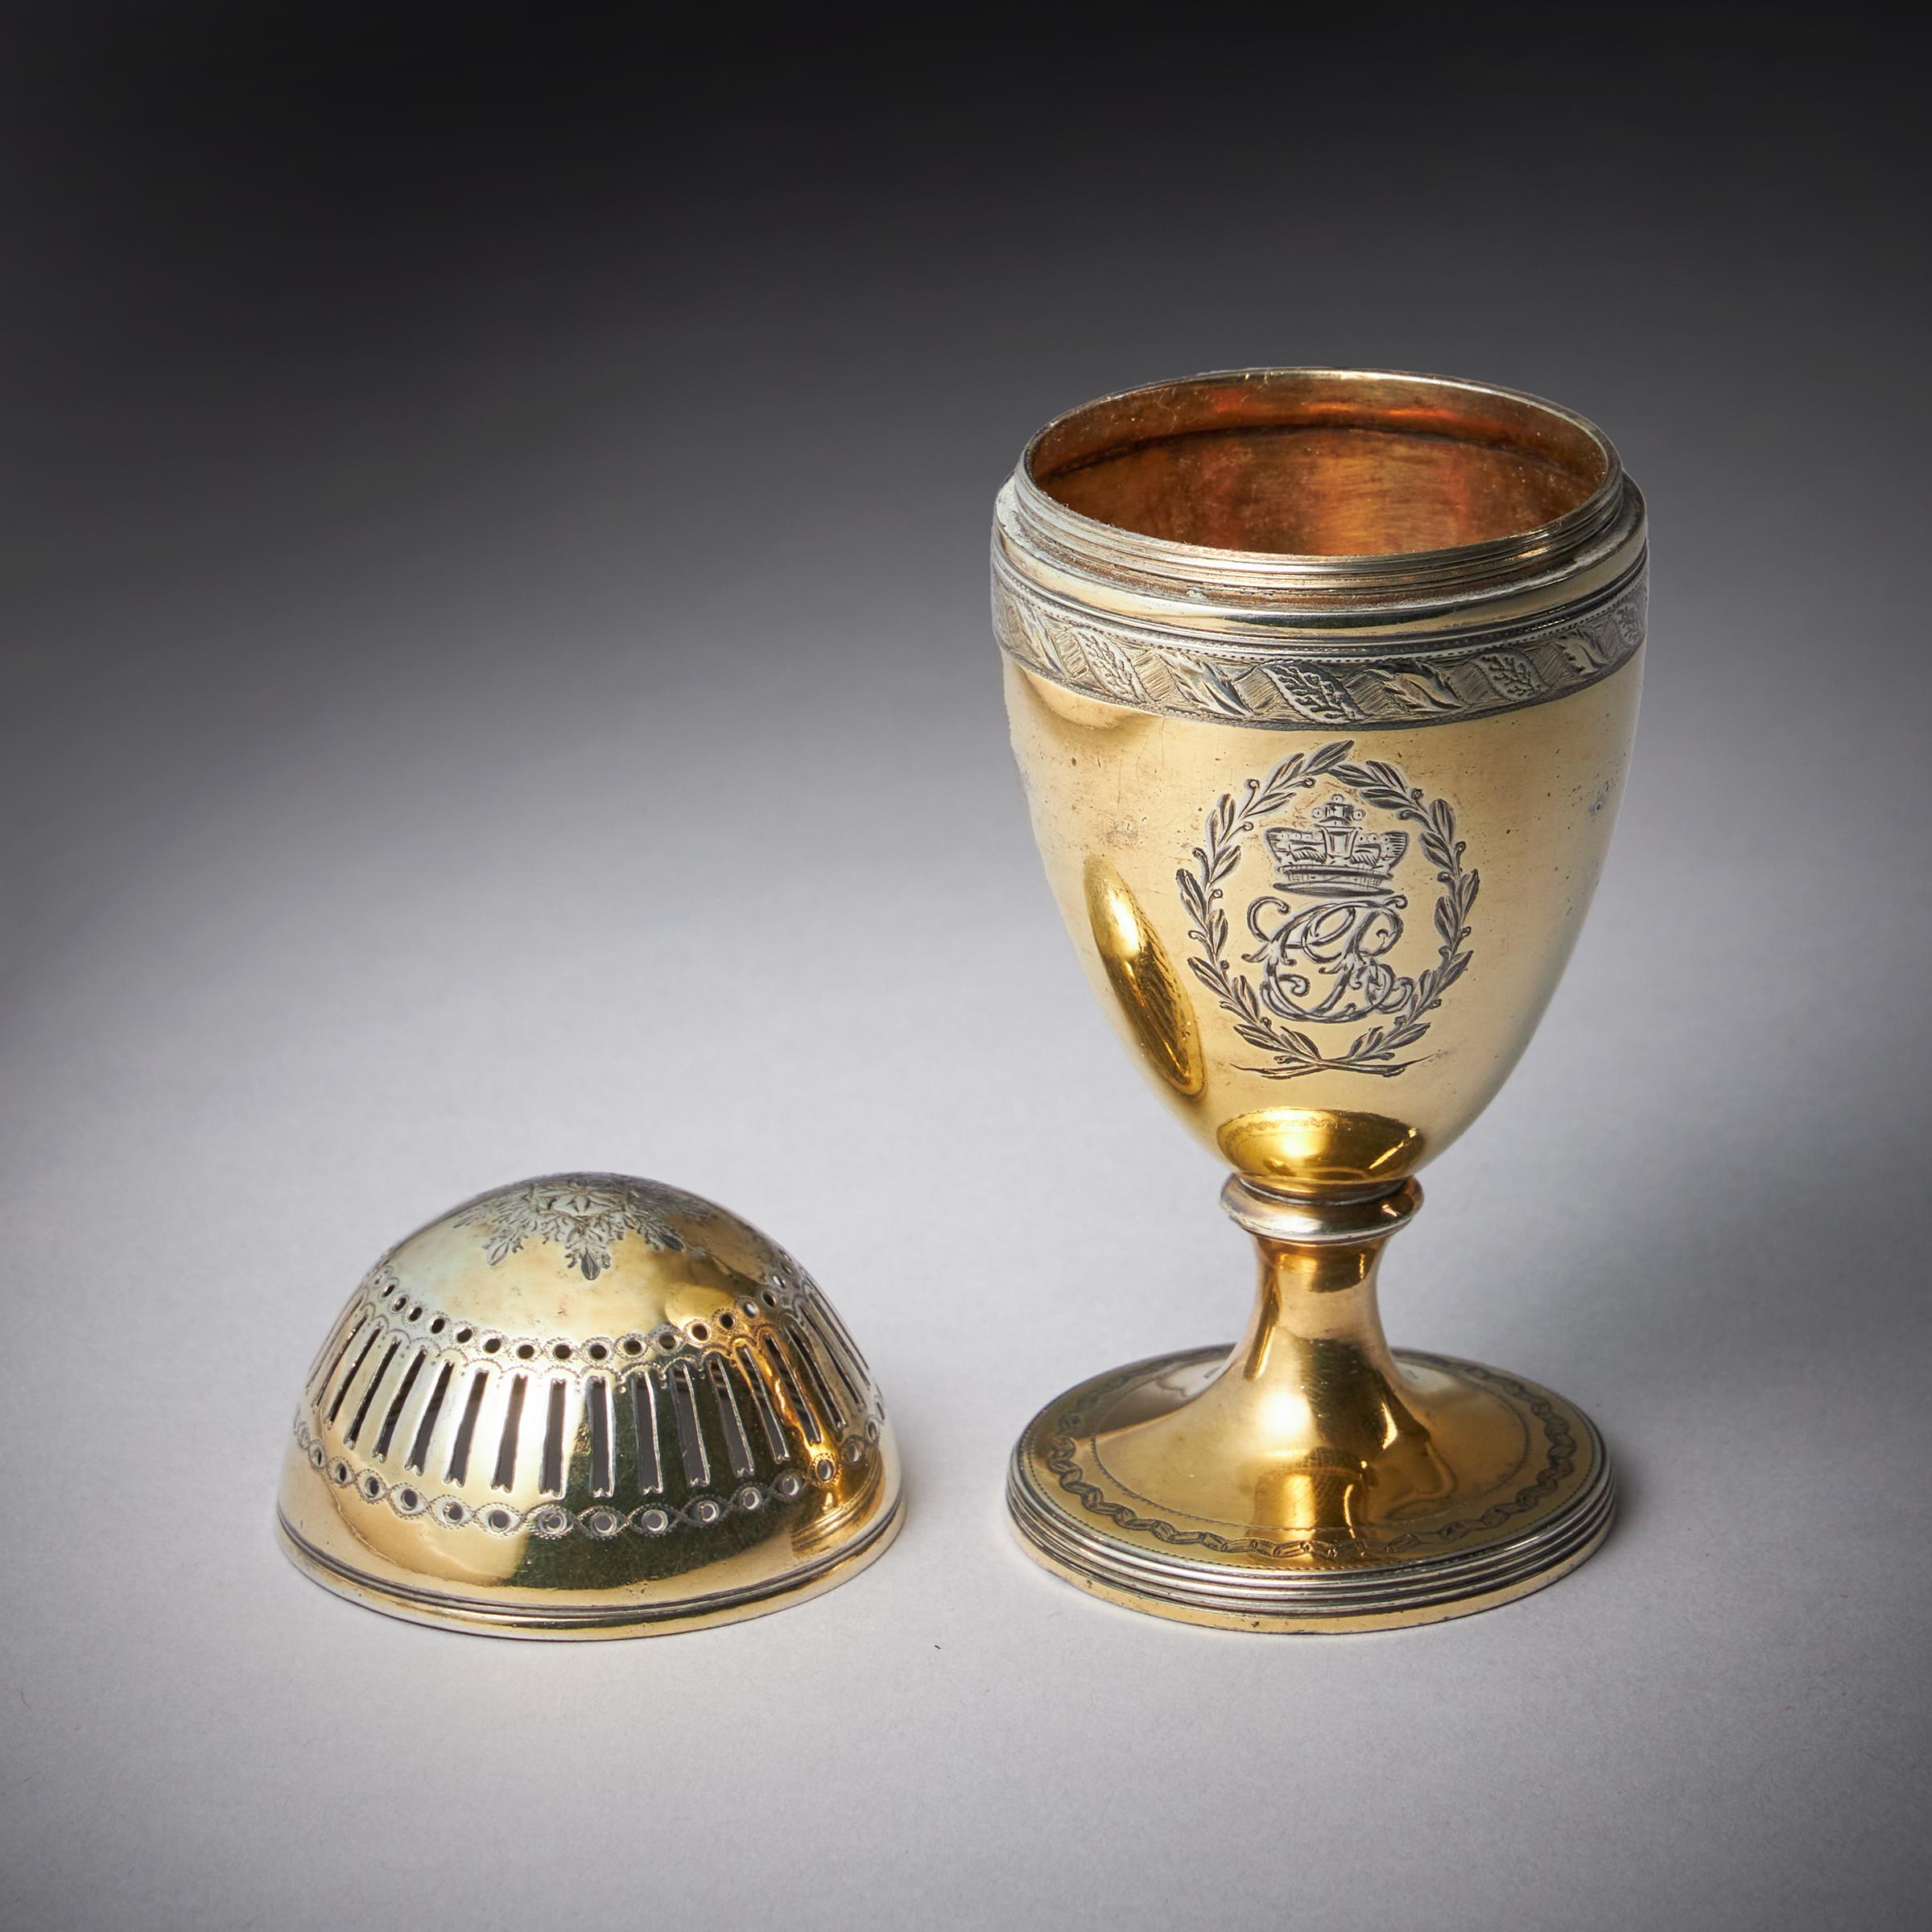 George III Silver-Gilt Pepper Pot with the Royal Cypher of Queen Charlotte 1798-17